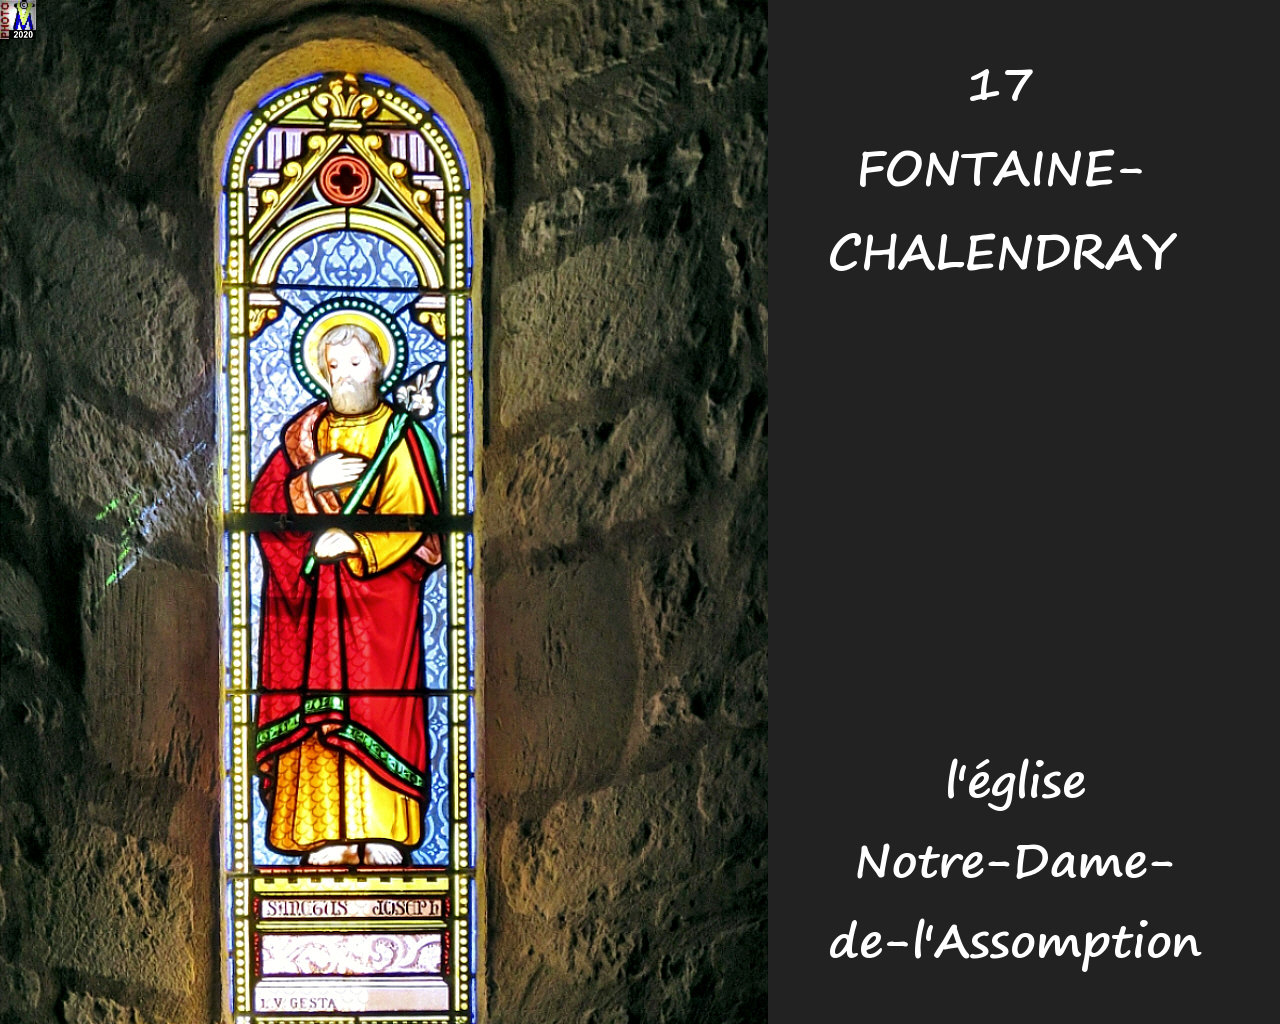 17FONTAINE-CHALENDRAY_eglise_1108.jpg